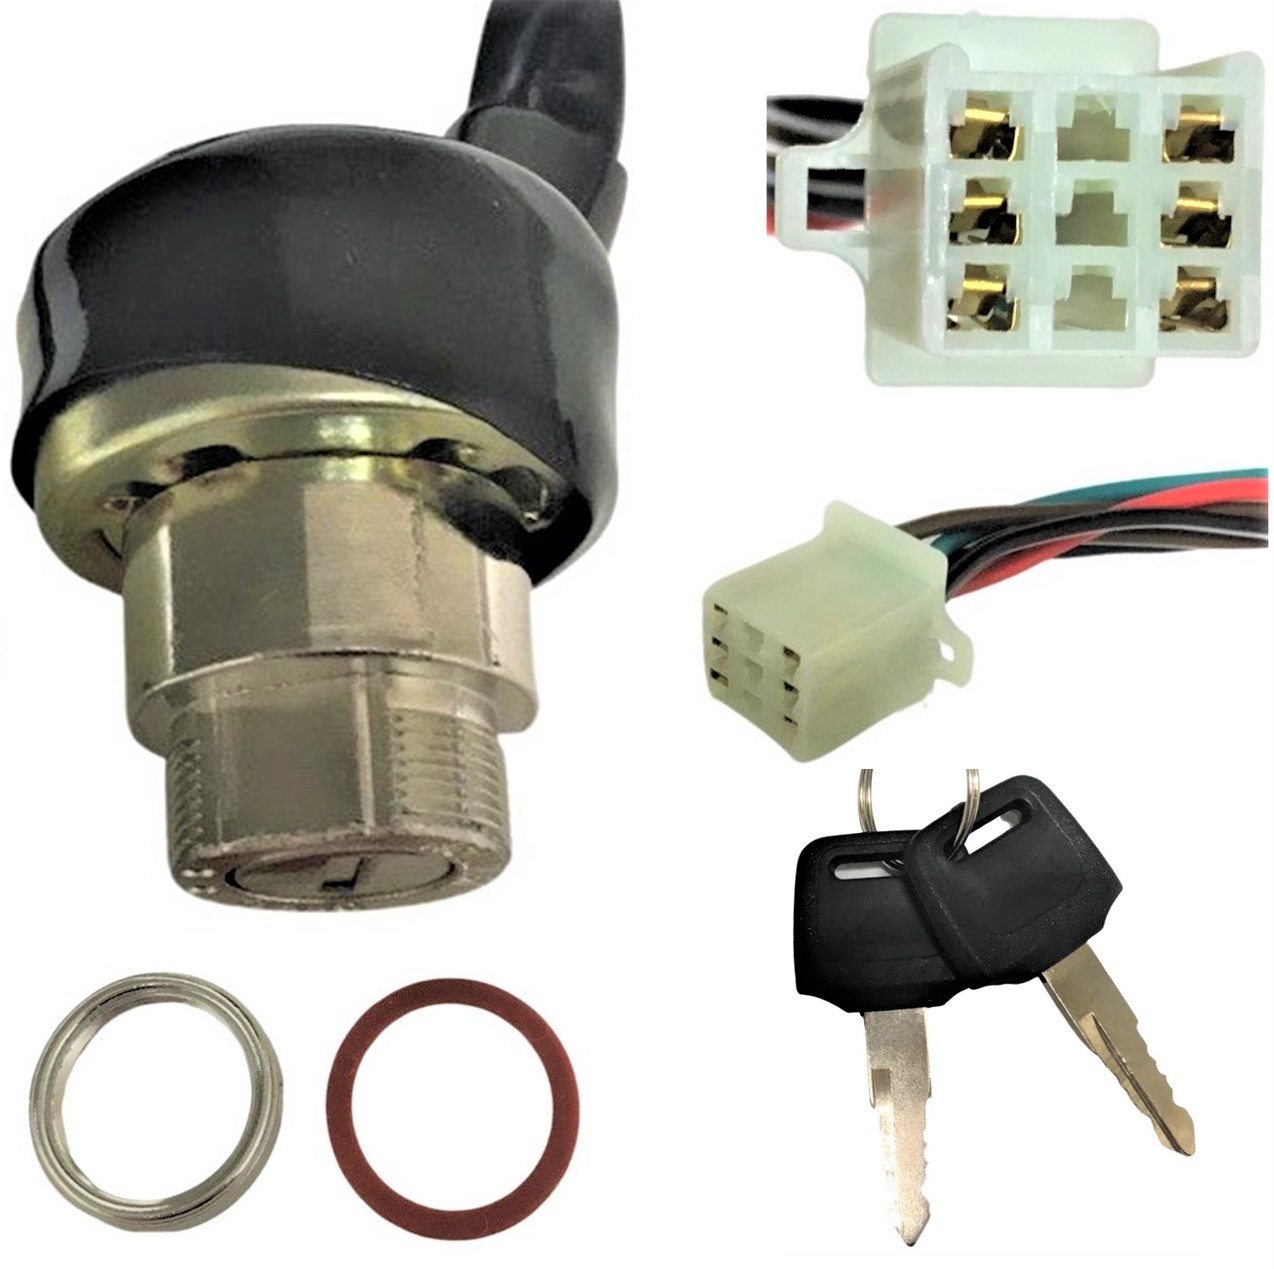 Ignition Switch Fits Many 70-110cc ATVs 6 pins in 9 pin Male Jack